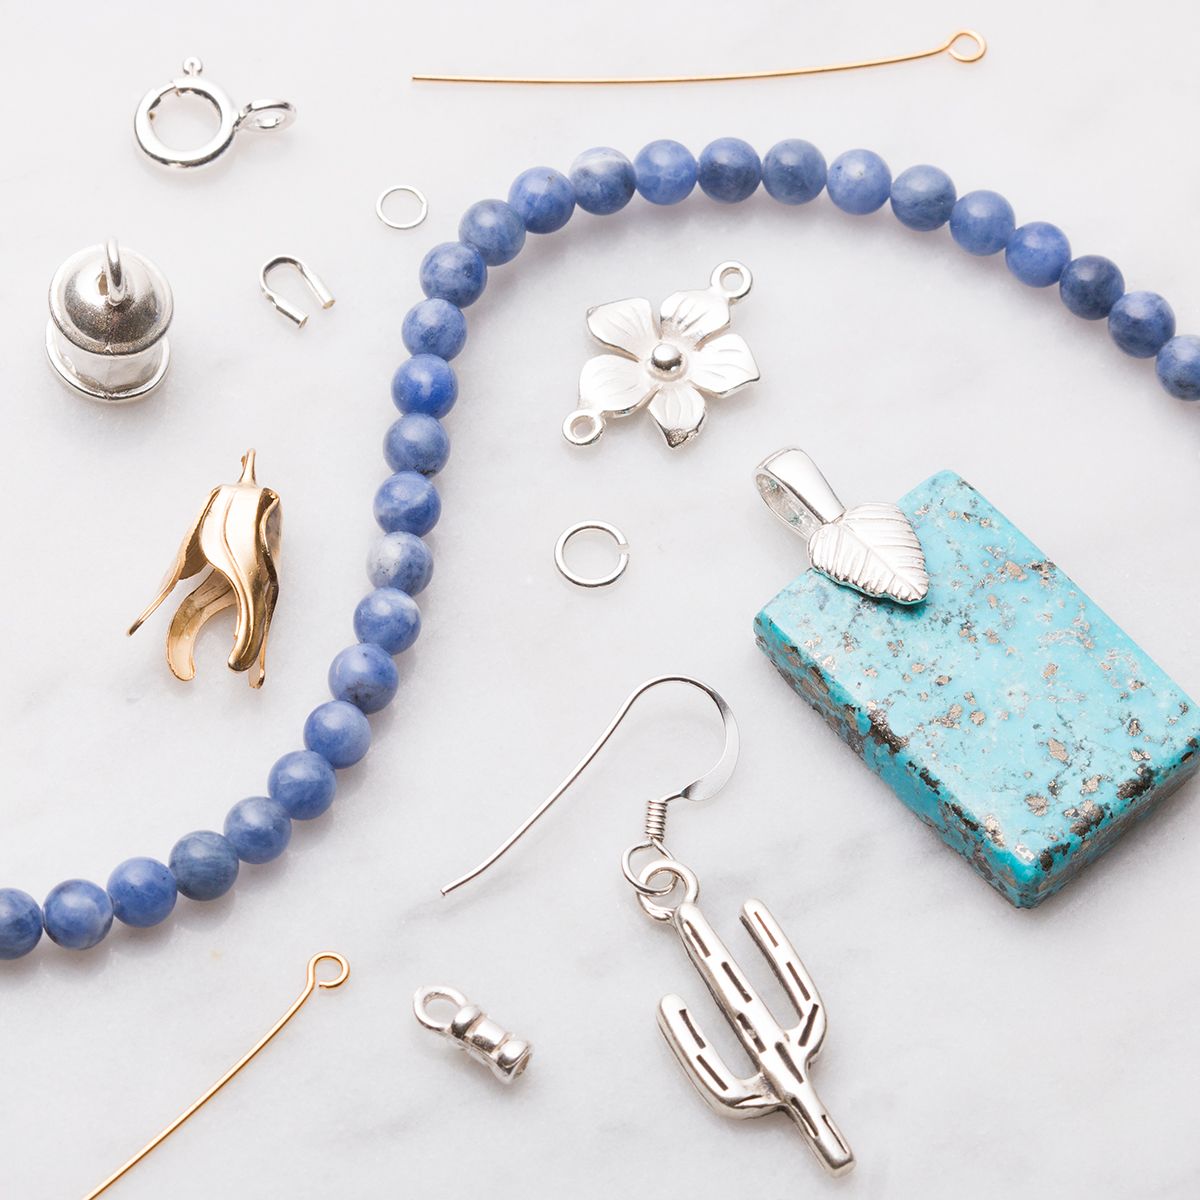 Make It or Buy It? When, Why and How to Make Your Own Jewelry Findings